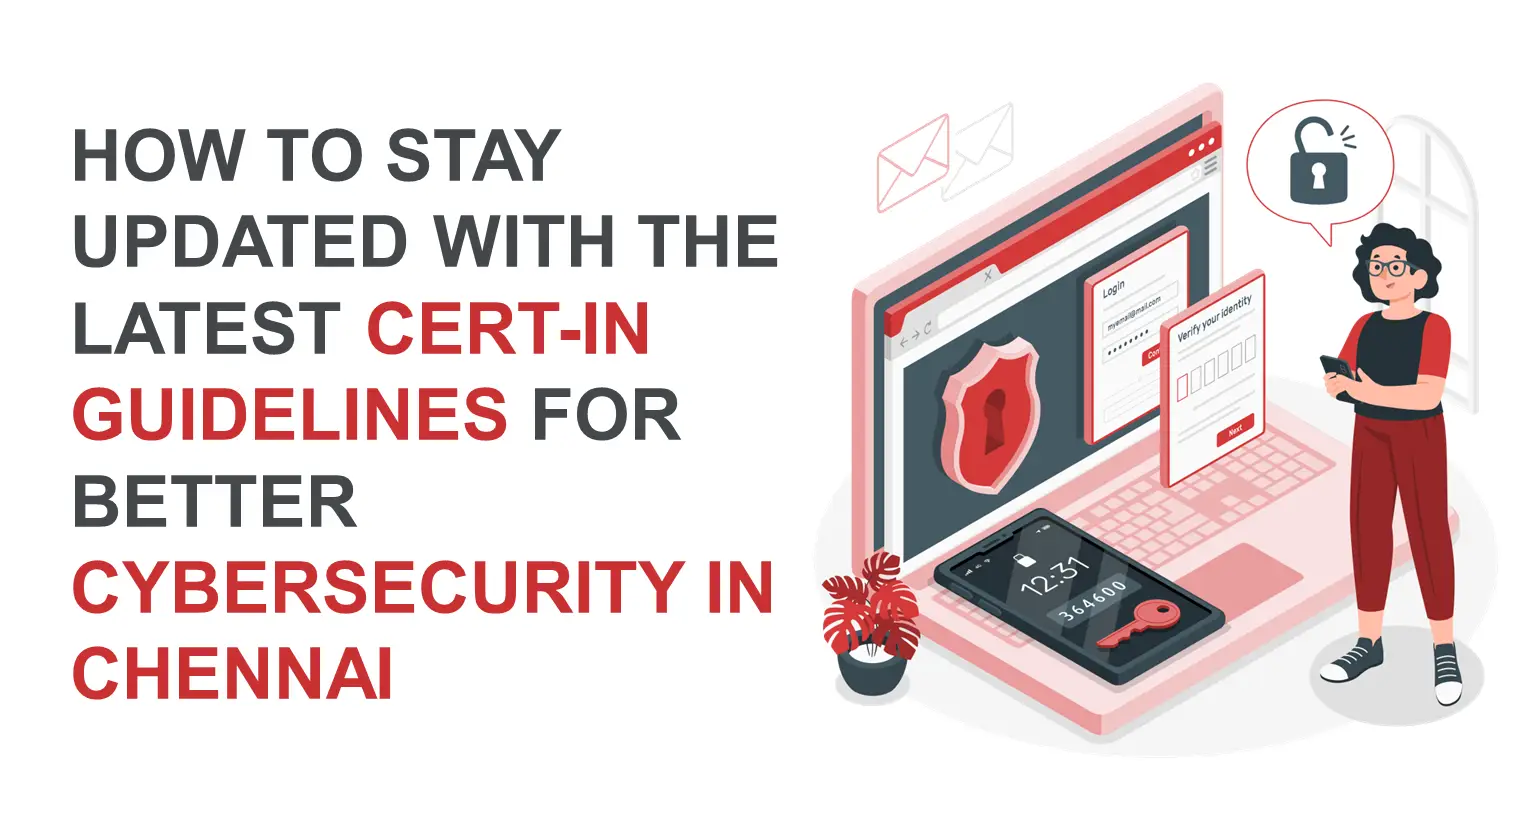 How to stay updated with the latest CERT-In guidelines for better cybersecurity in Chennai